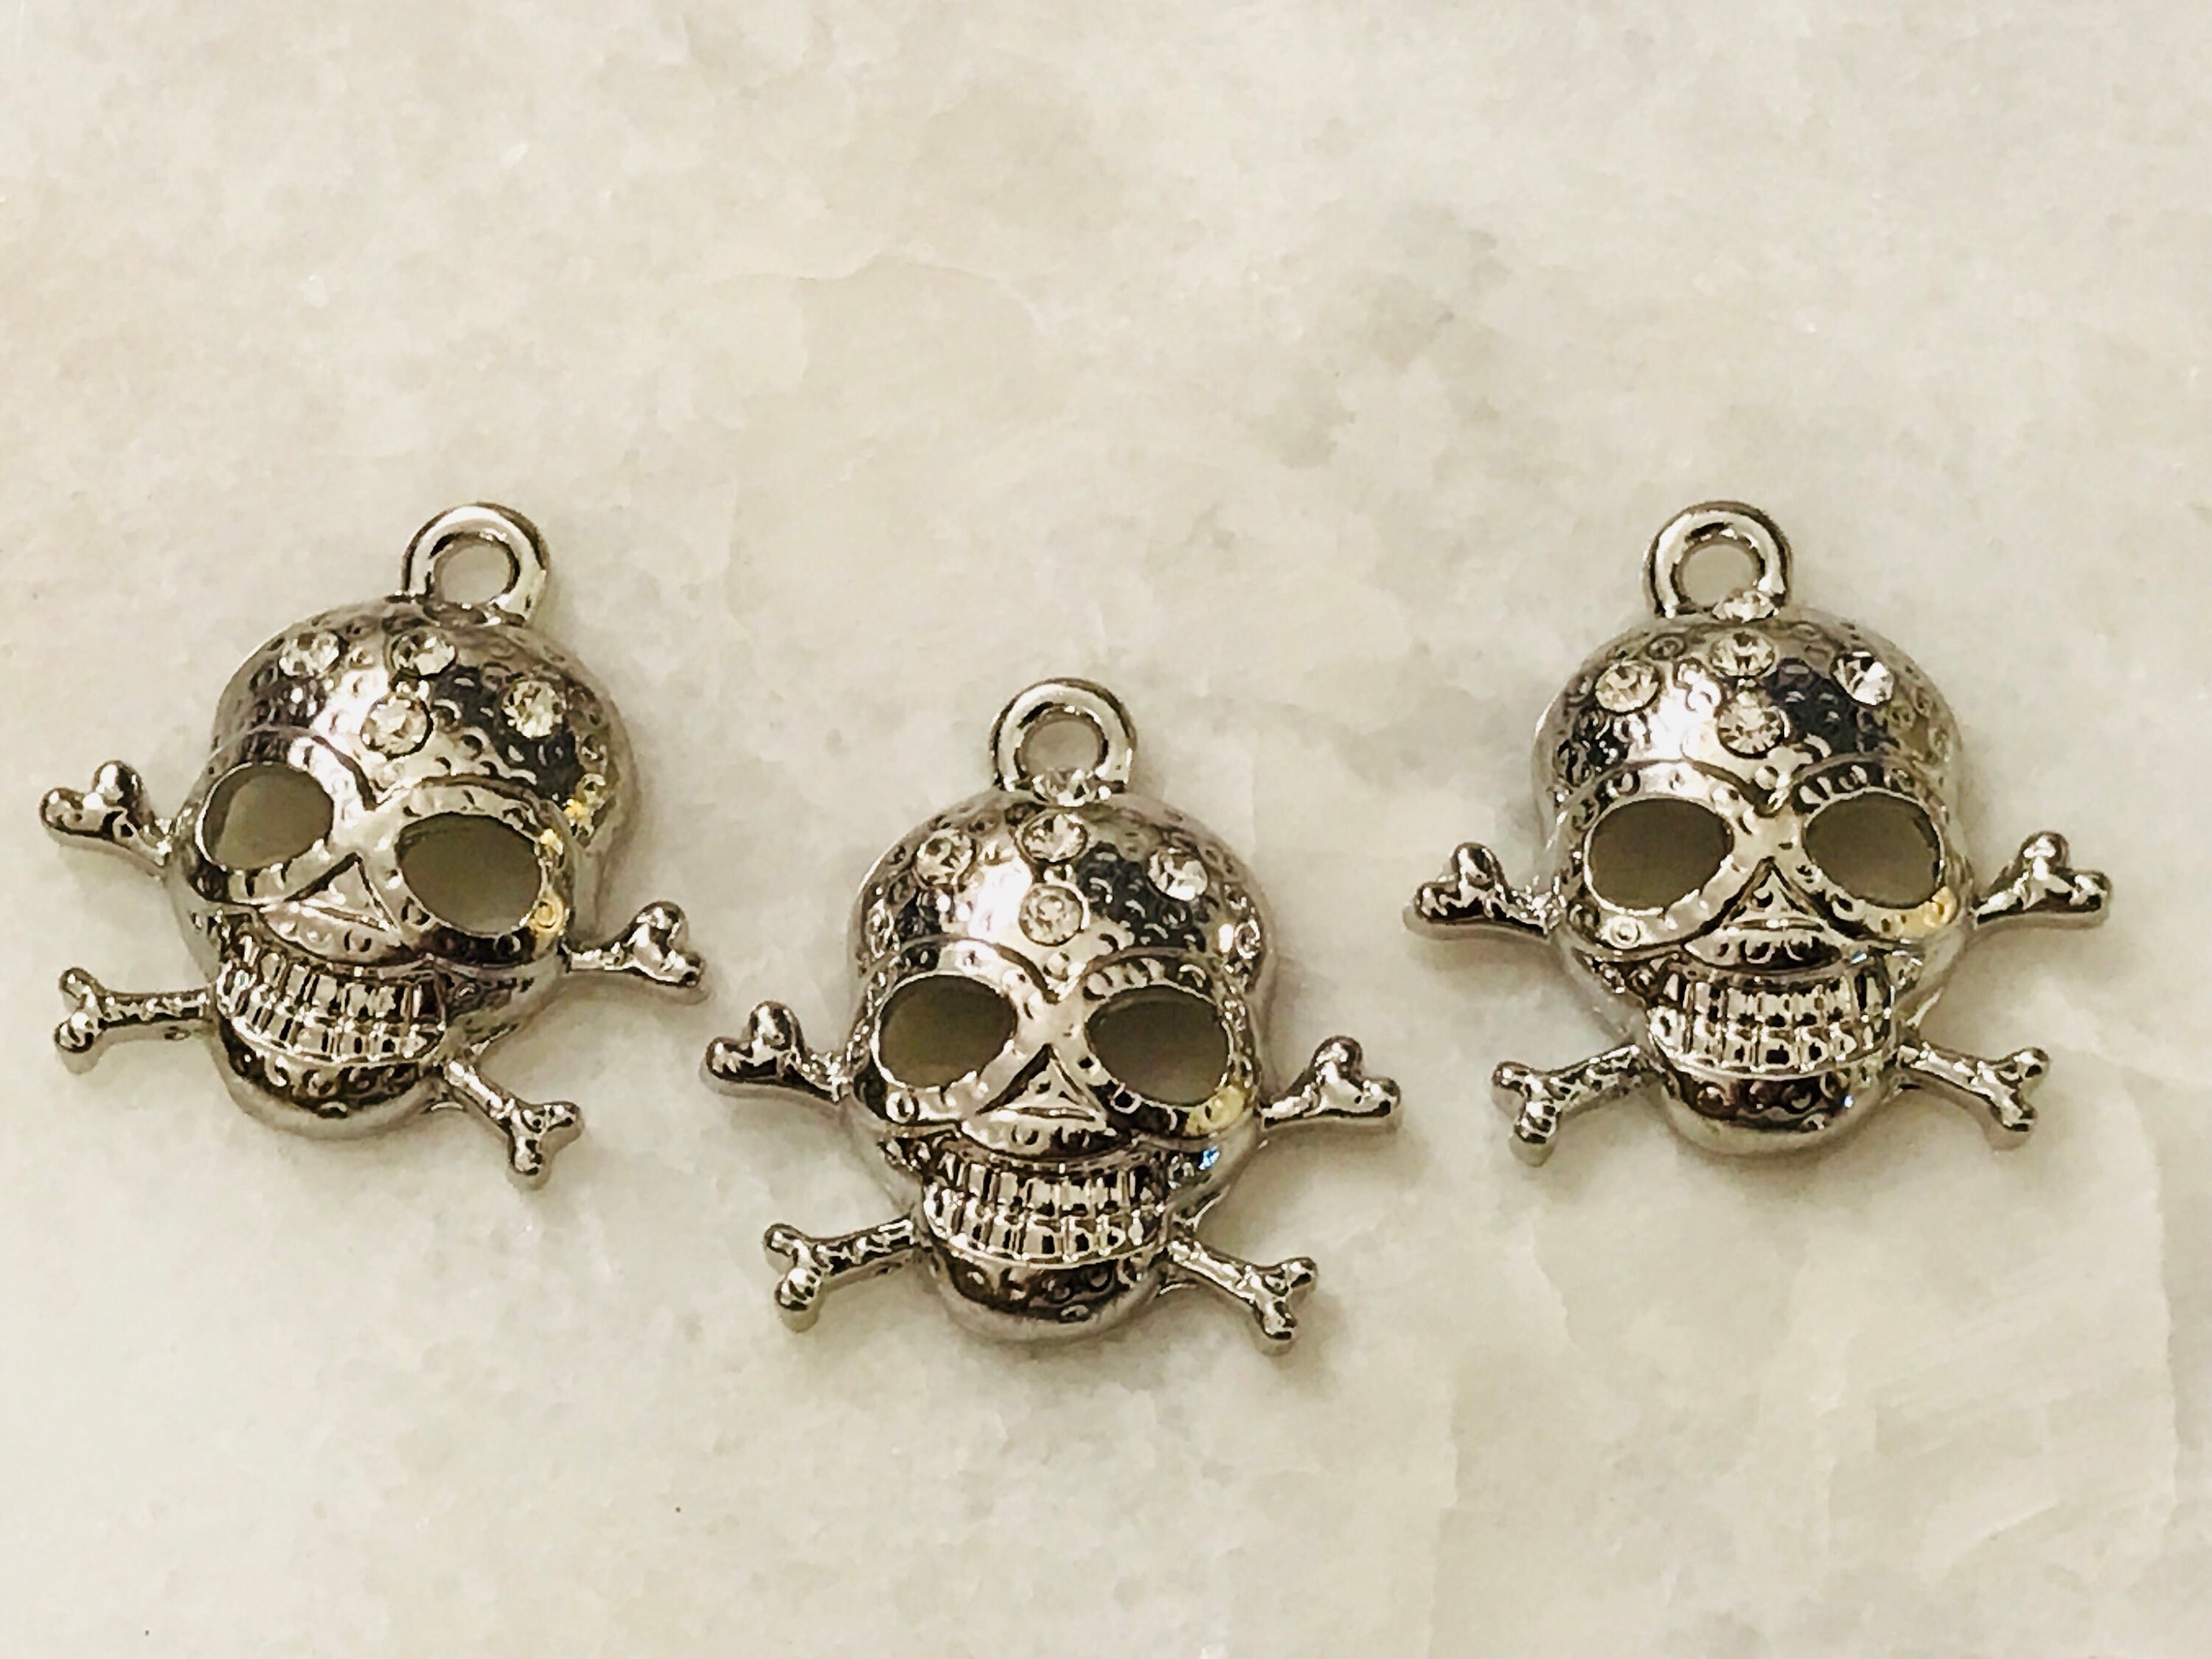 3 shiny silver and rhinestone skull charms hammered design | Etsy